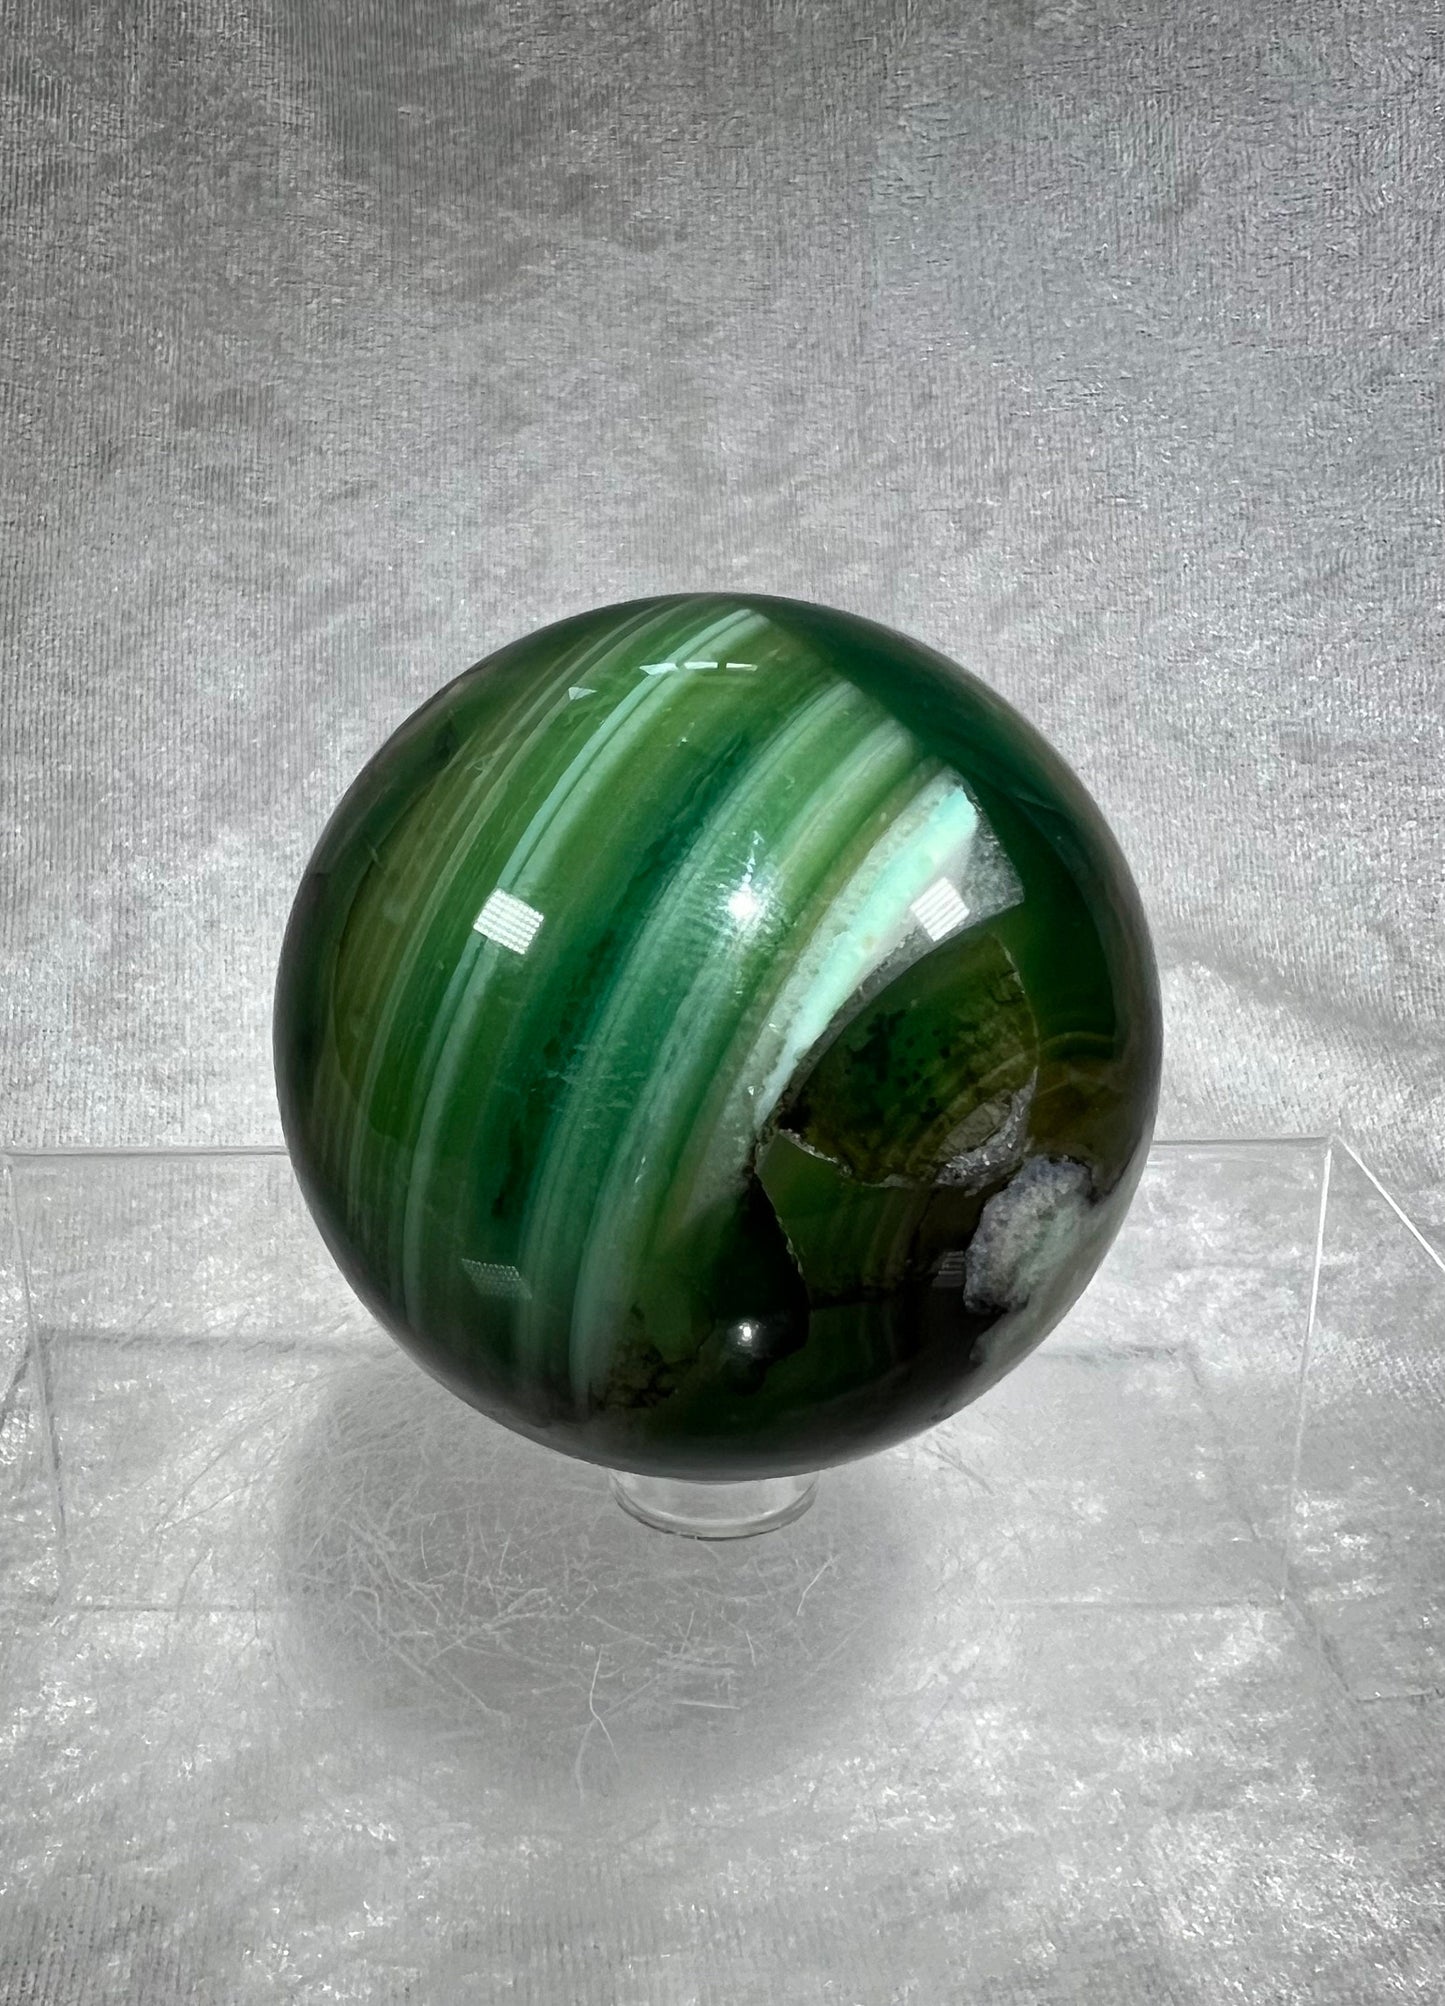 Amazing Green Flower Agate Sphere With Incredible Banding. 62mm. Beautiful Color And Patterns. Unique Crystal Sphere.